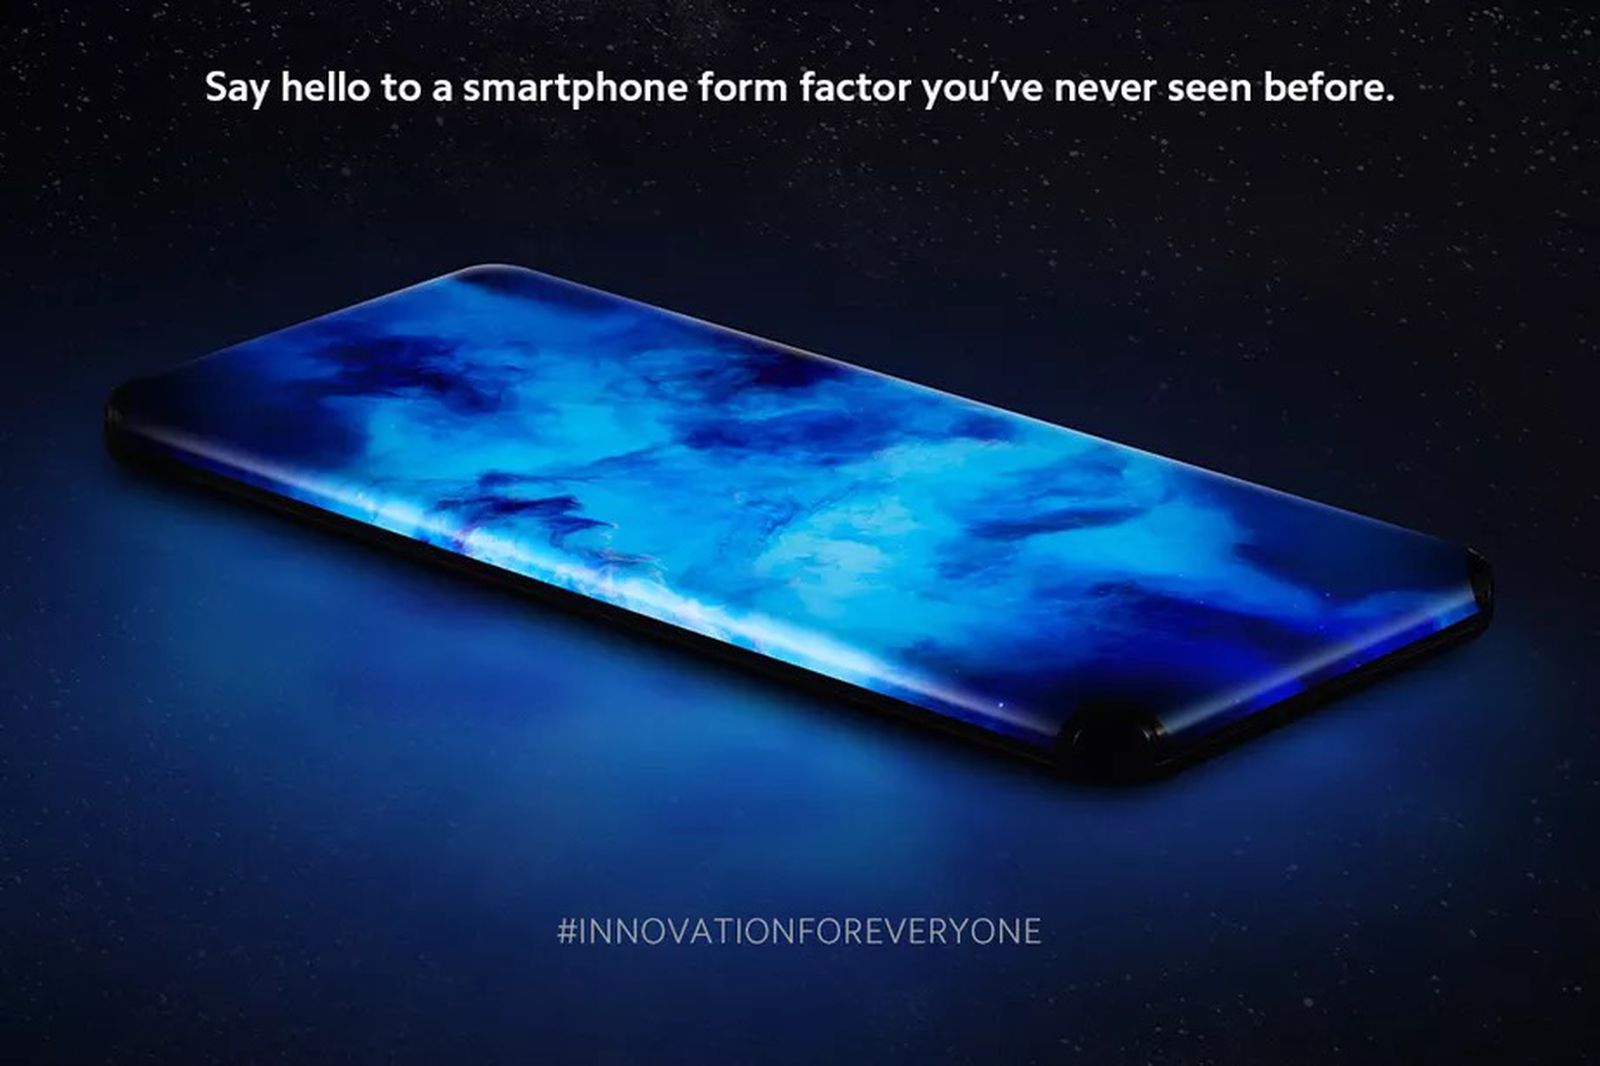 Xiaomi unveils new concept phone with ‘waterfall’ screen on all four sides